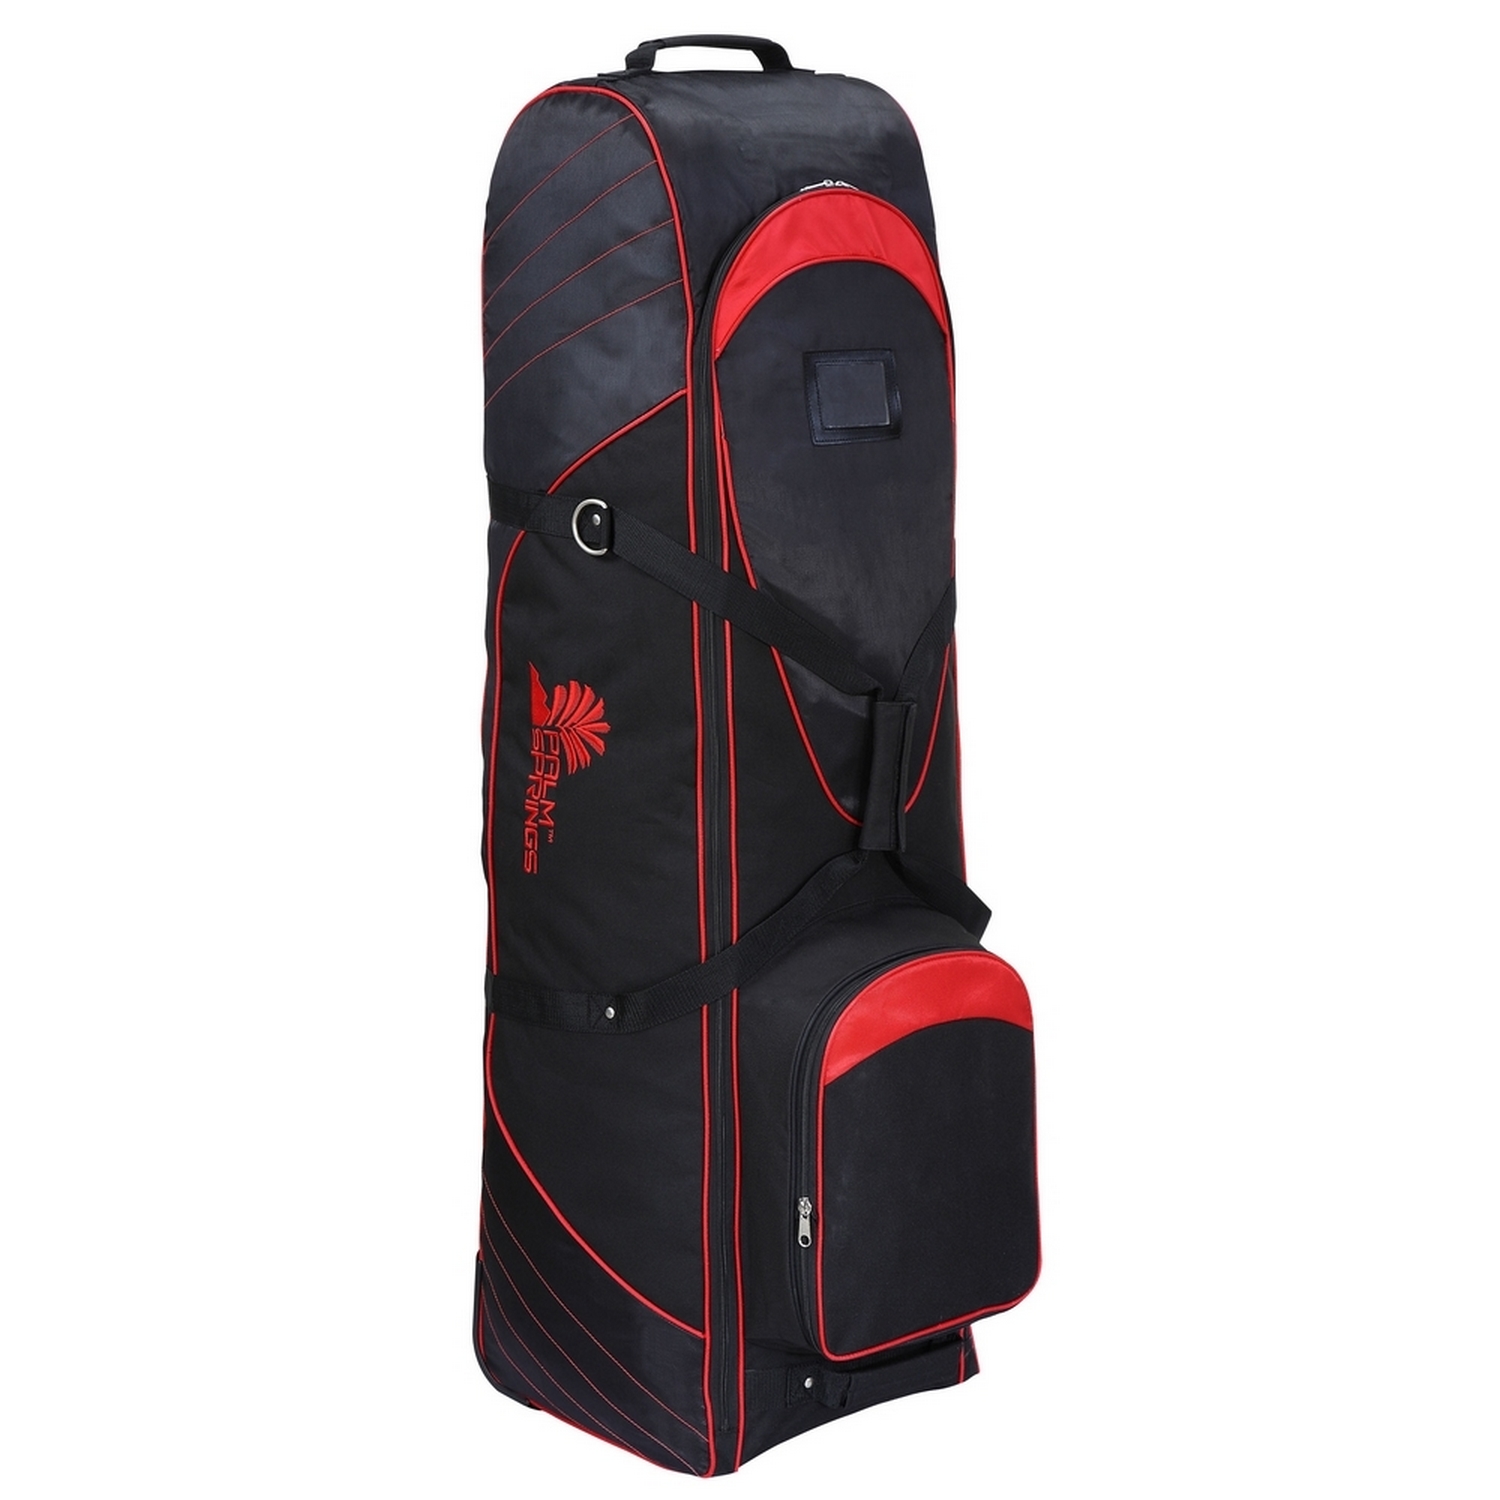 Palm Springs Golf Bag Tour Travel Cover V2 With Wheels Black/Red - image 3 of 3